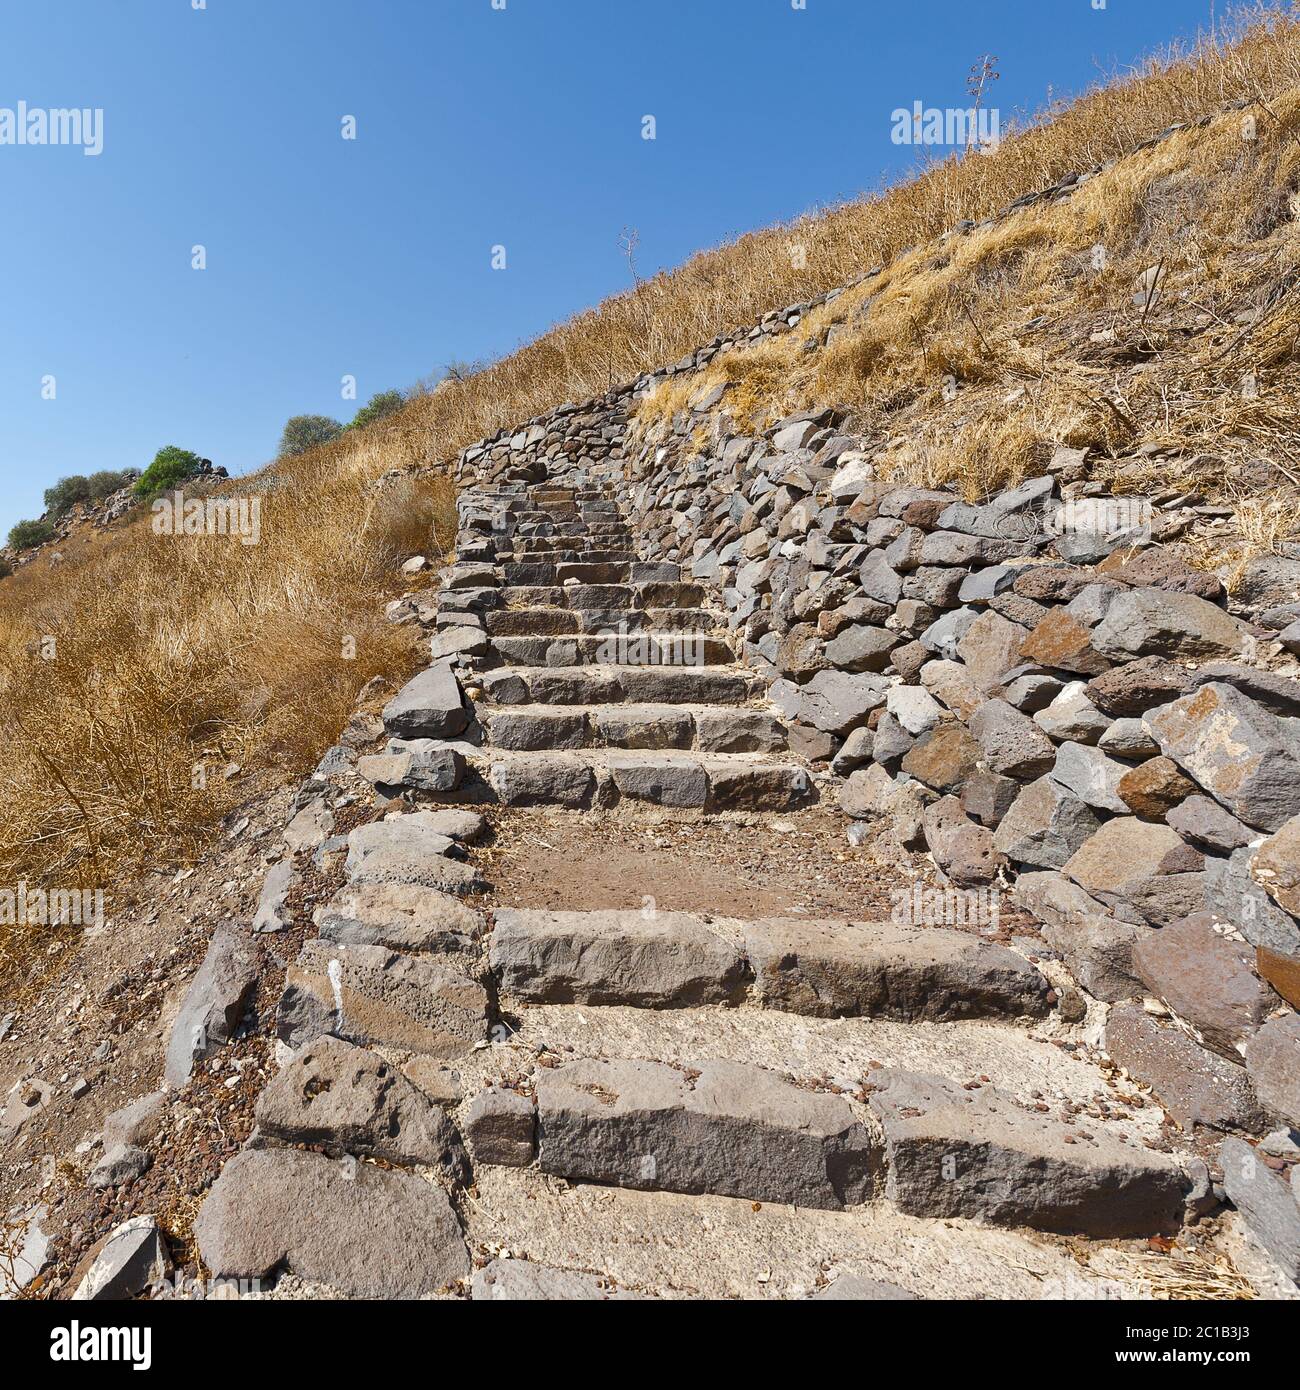 Archaeological sites of the Golan Heights Stock Photo